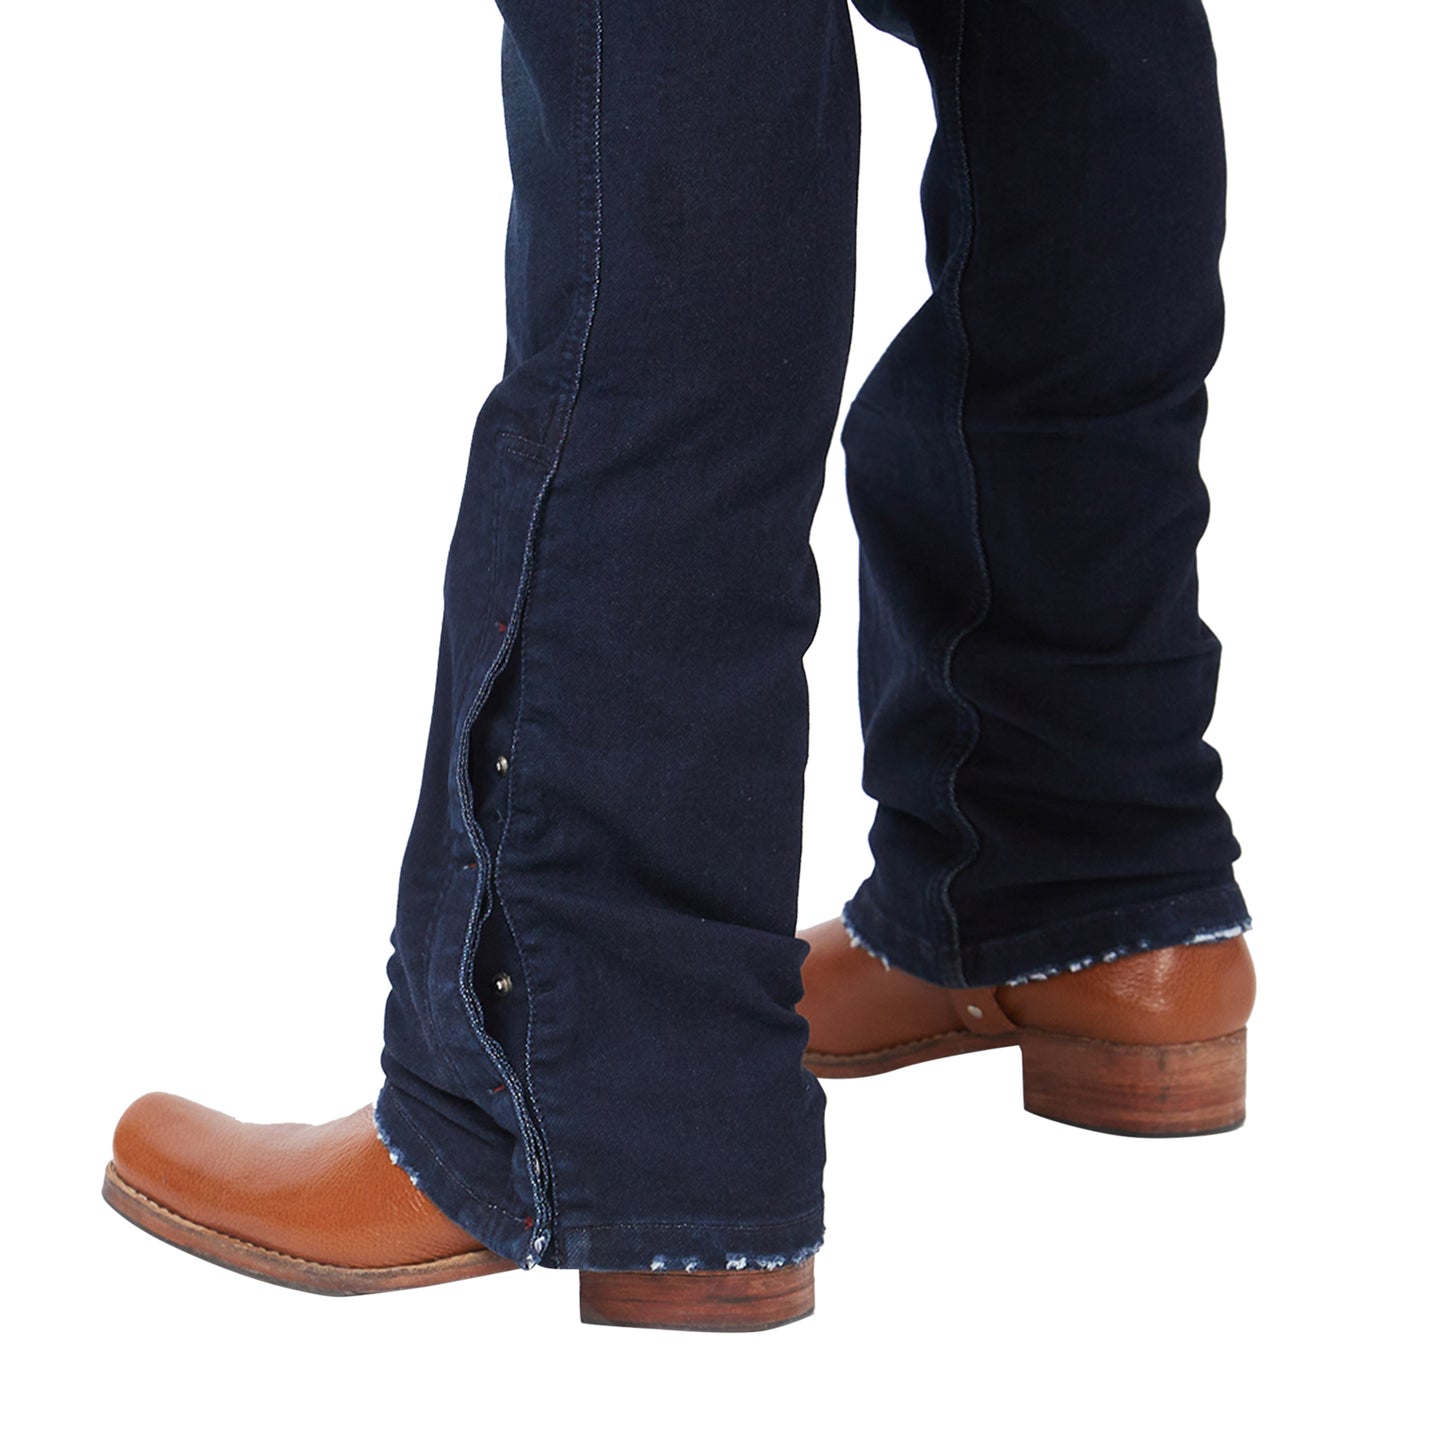 Men's Casual Denim Regular Fit Solid Stretchable Boot-cut Jeans